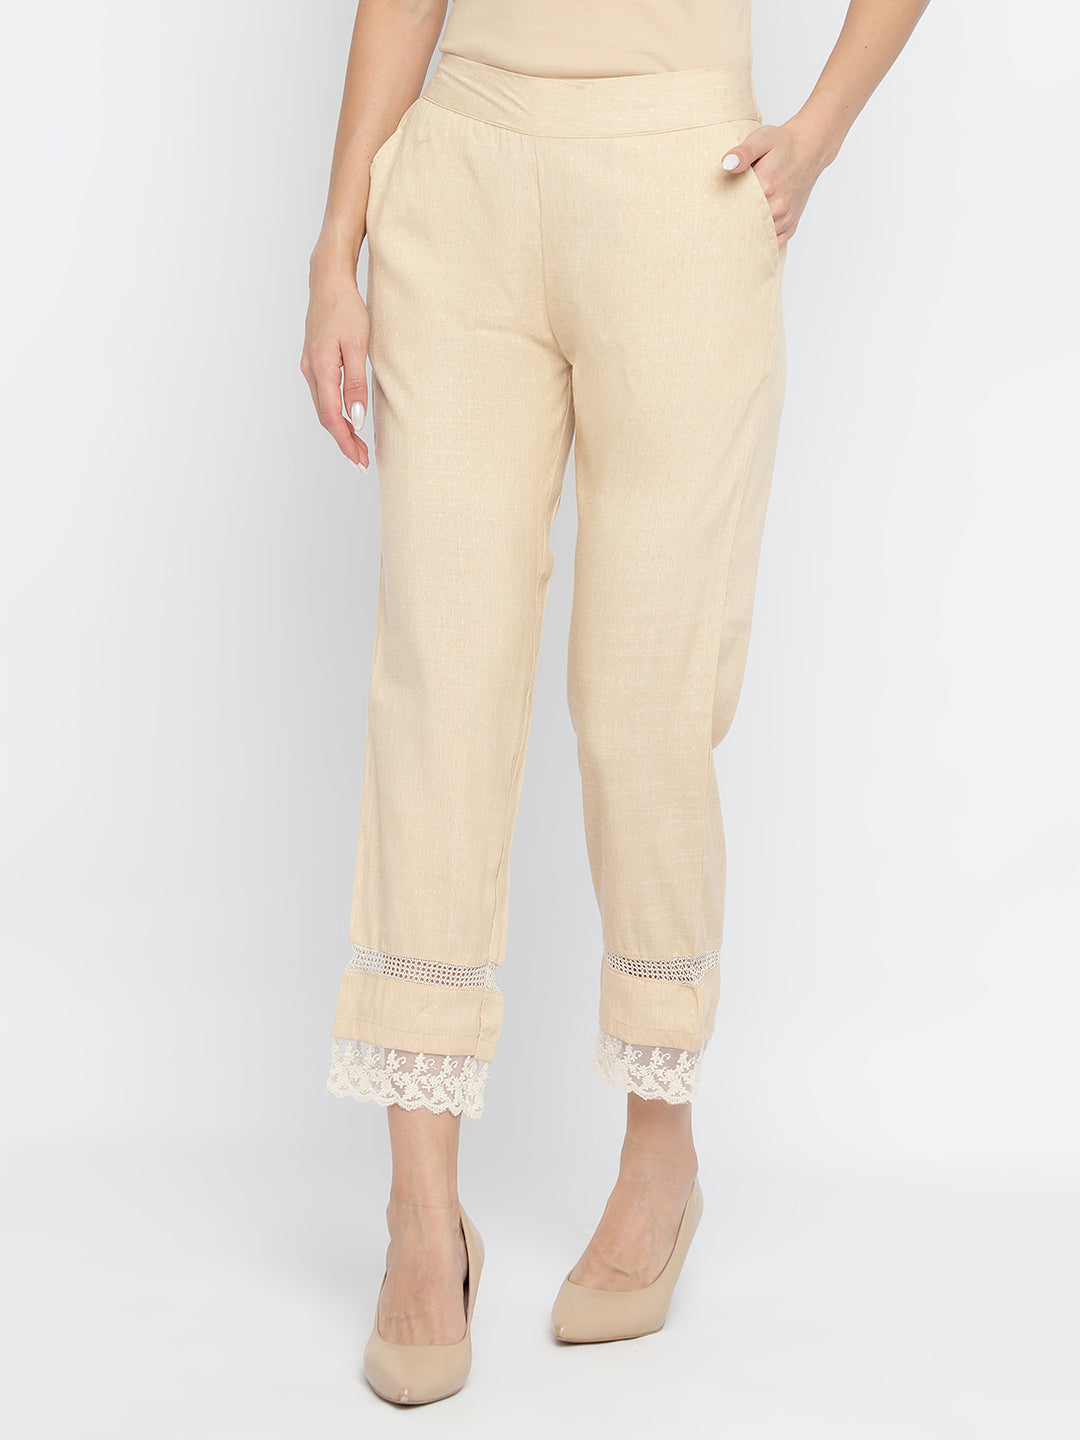 Vintage Cream Colored Pants 30 x 30 – Karla and Co.